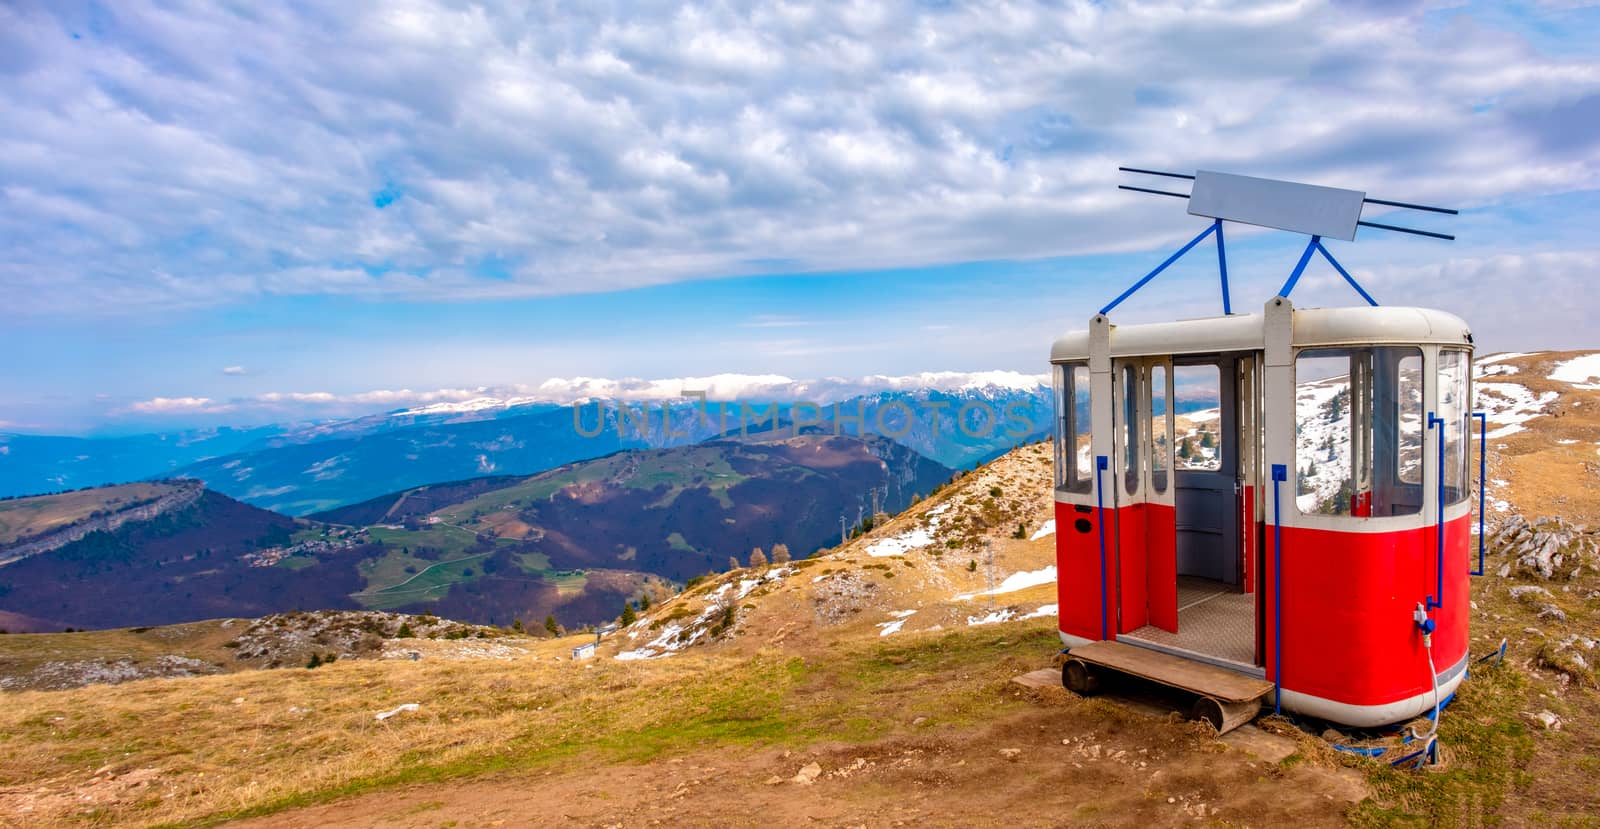 old cable way lift gondola cab abandoned in peak panorama of Monte Baldo mountain near Malcesine in Italy .